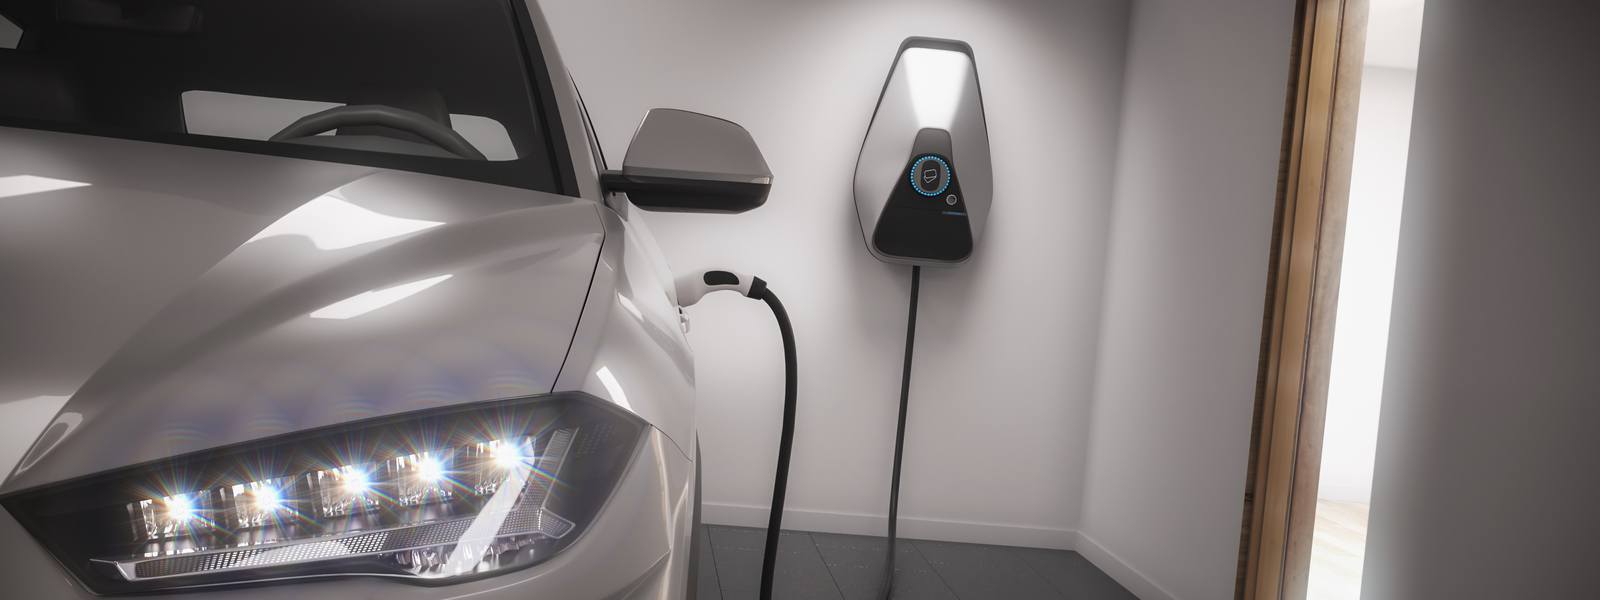 3 Levels of Home Electric Vehicle Charging Systems